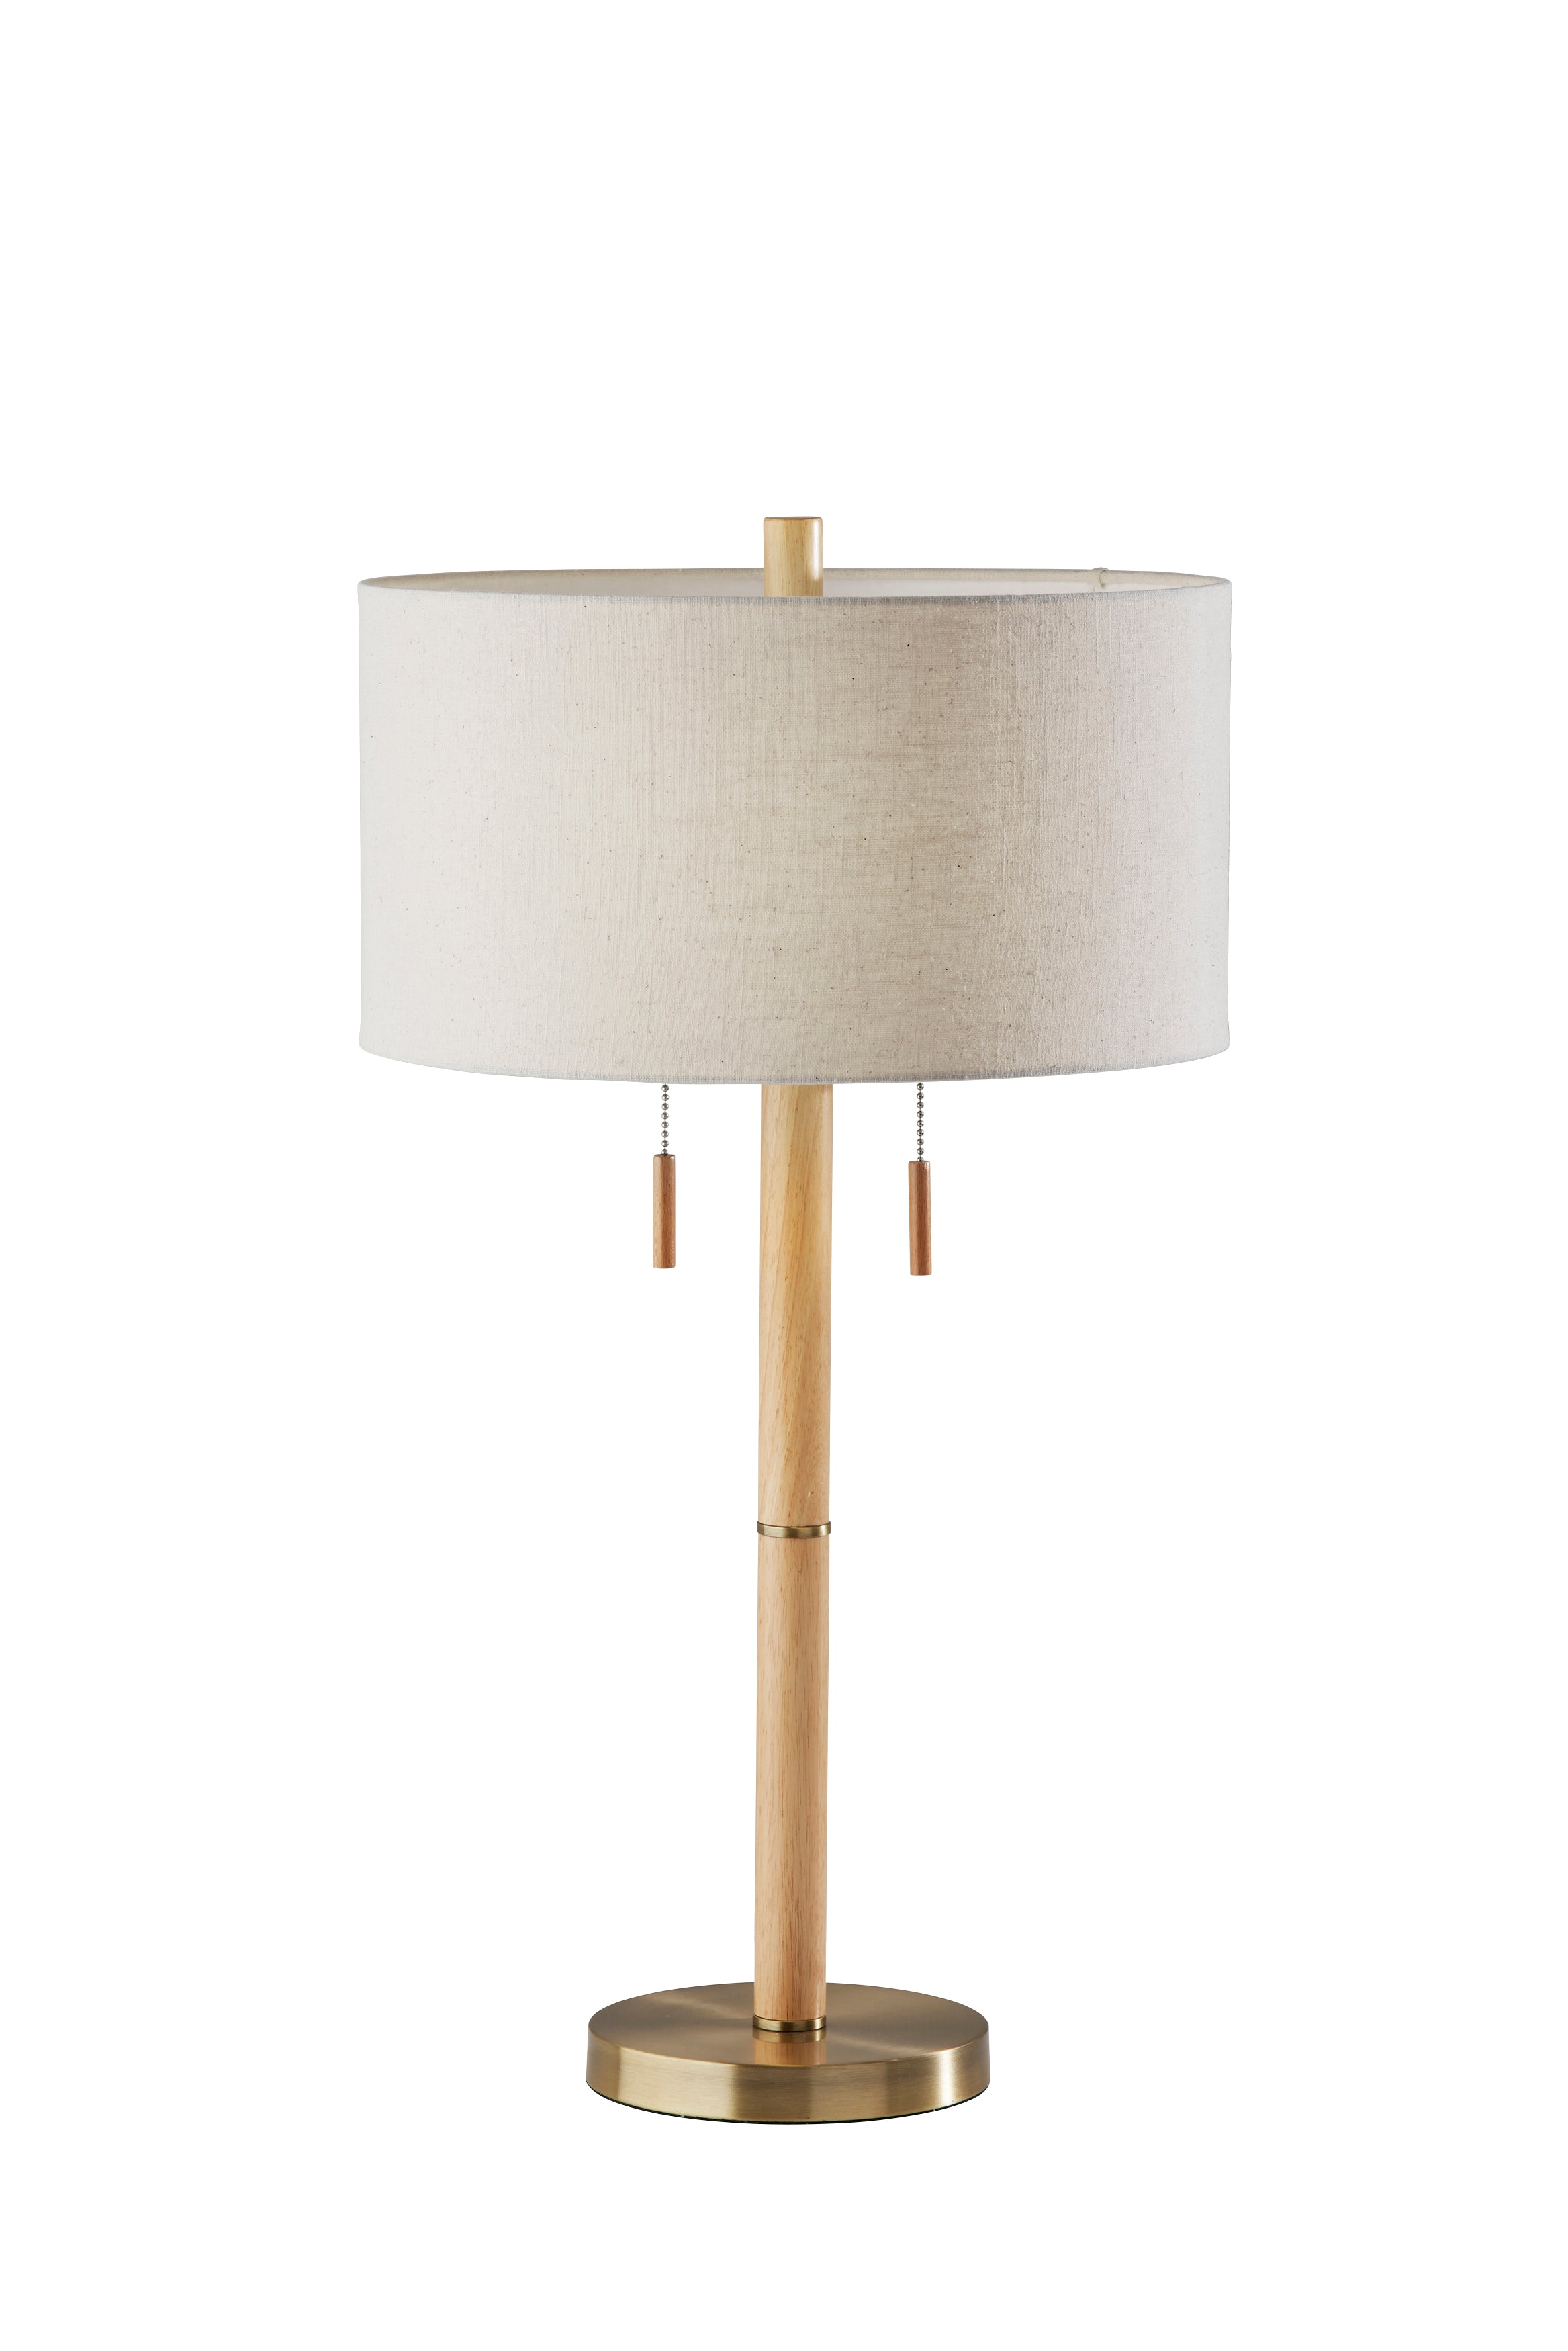 MADELINE Lampe sur table Bois, Or - 3374-12 | ADESSO